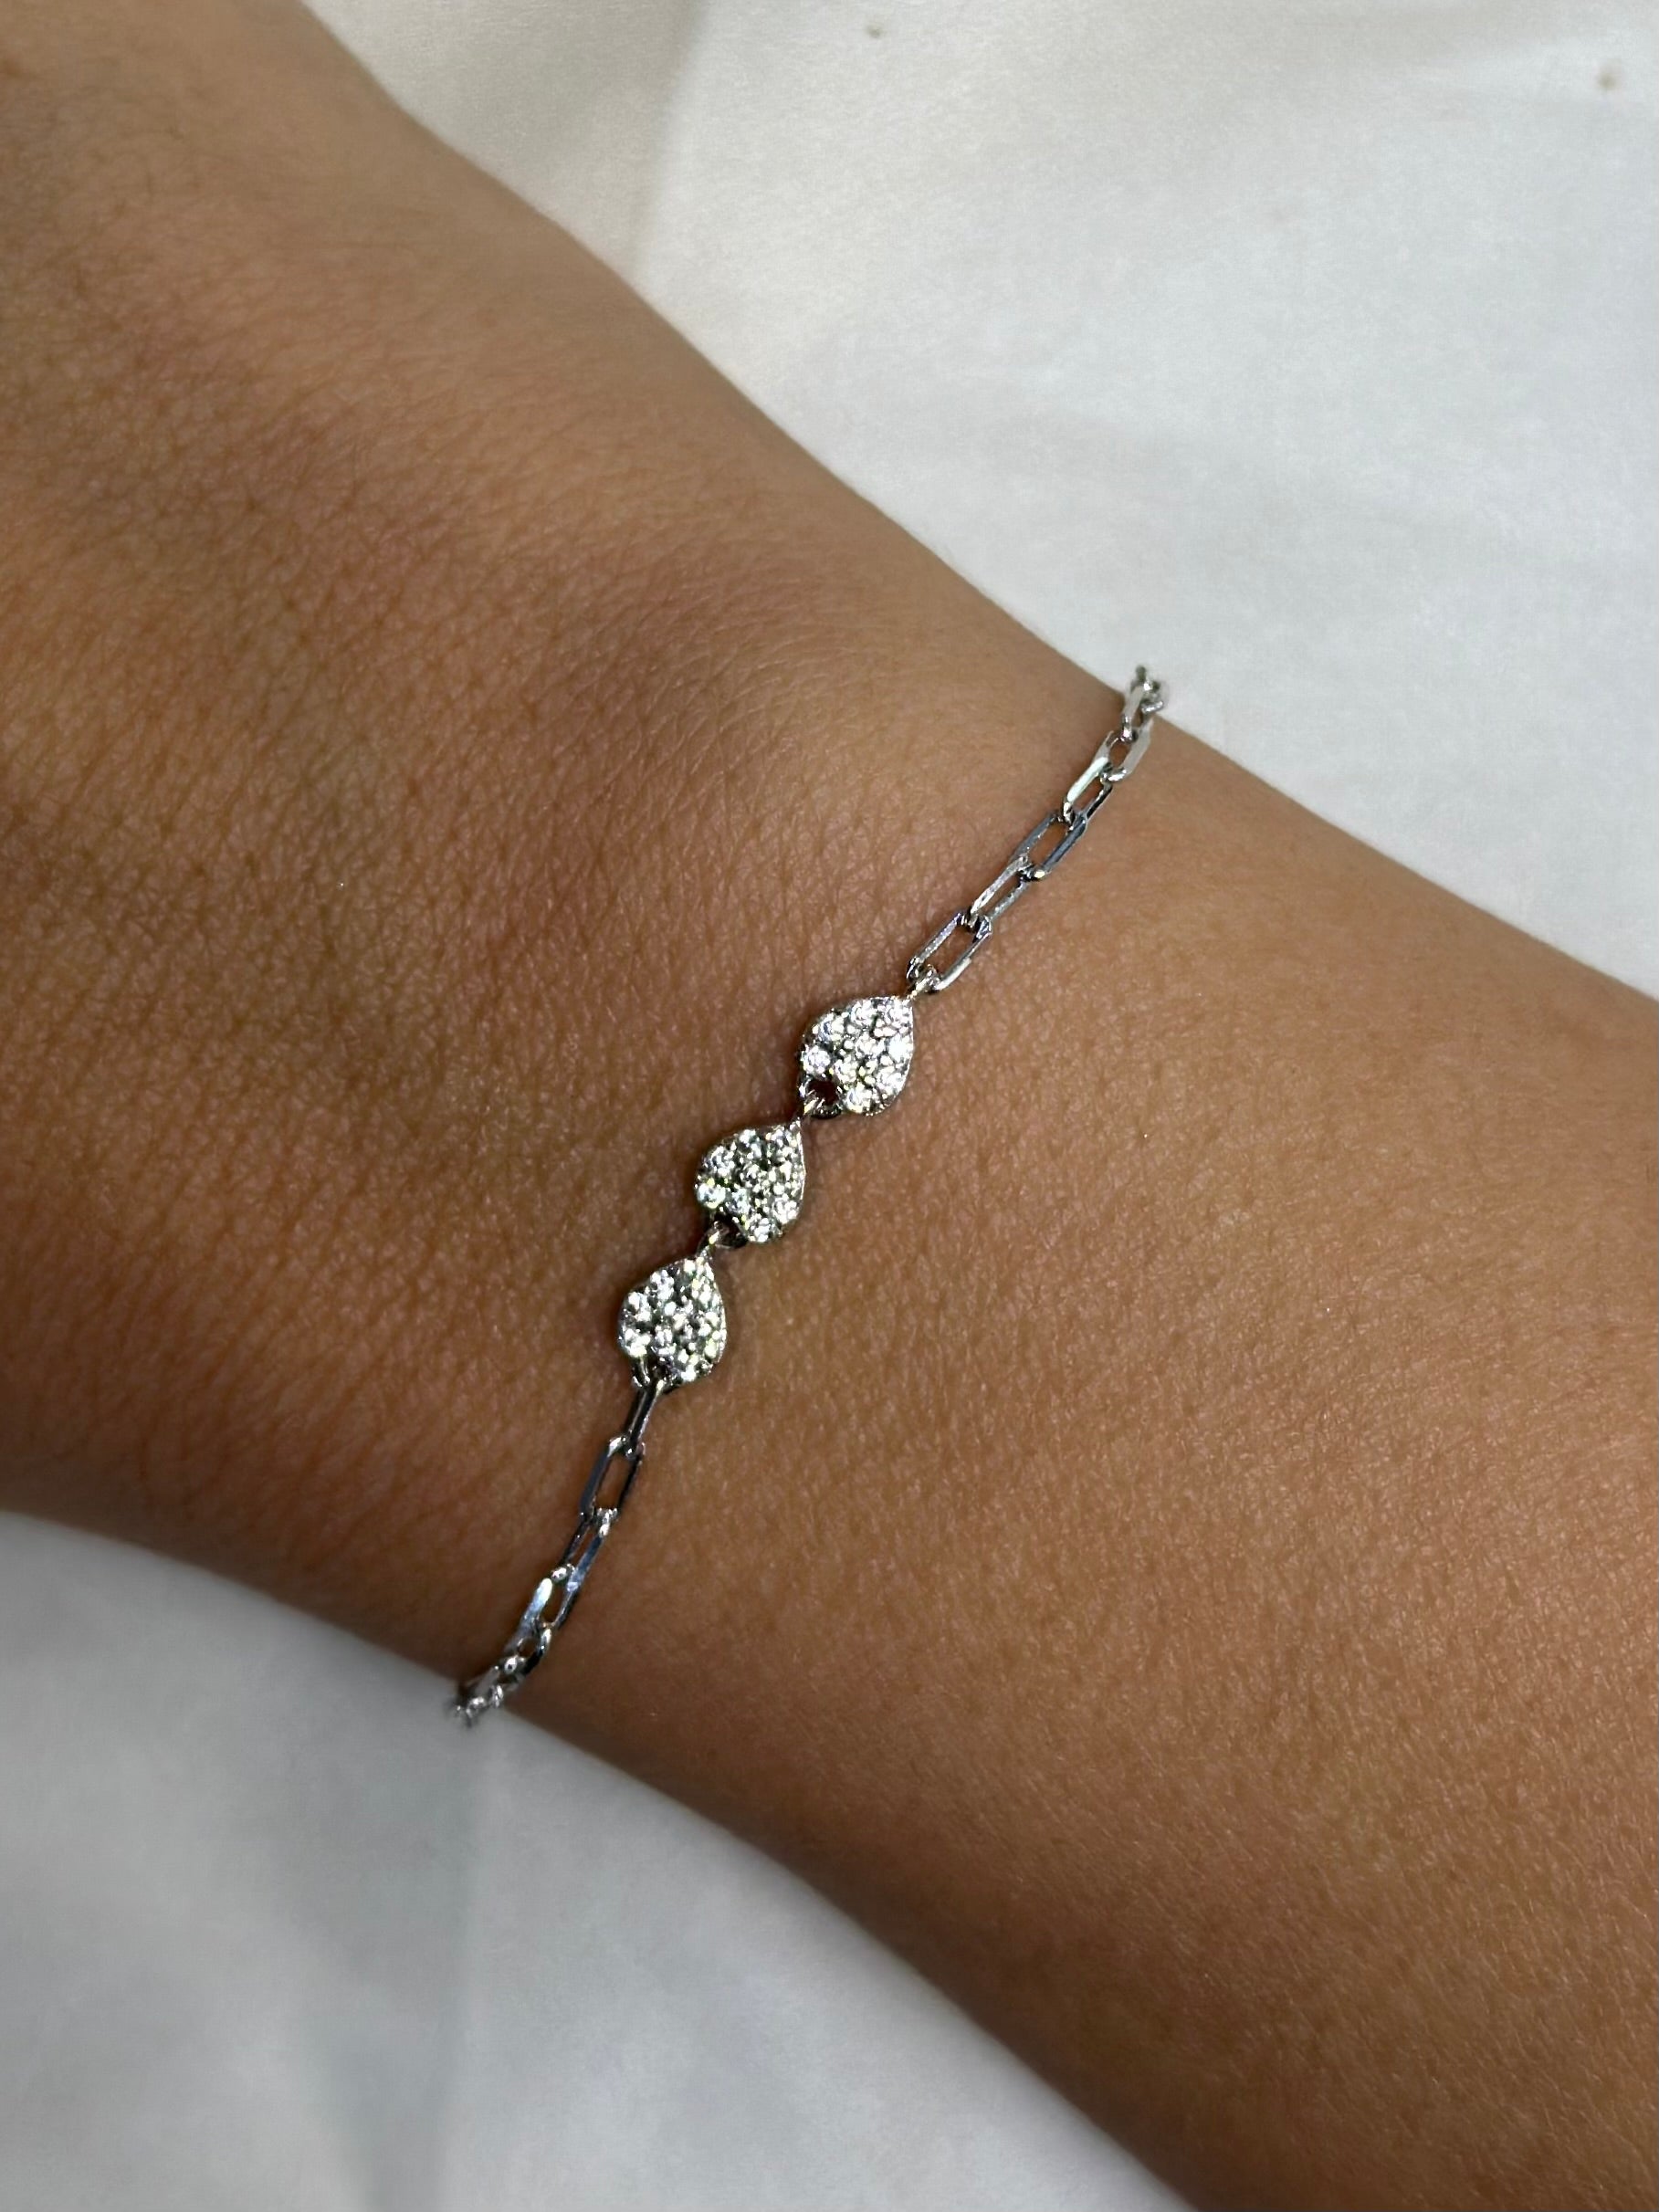 DELICATE BRACELET WITH THREE SMALL HEARTS